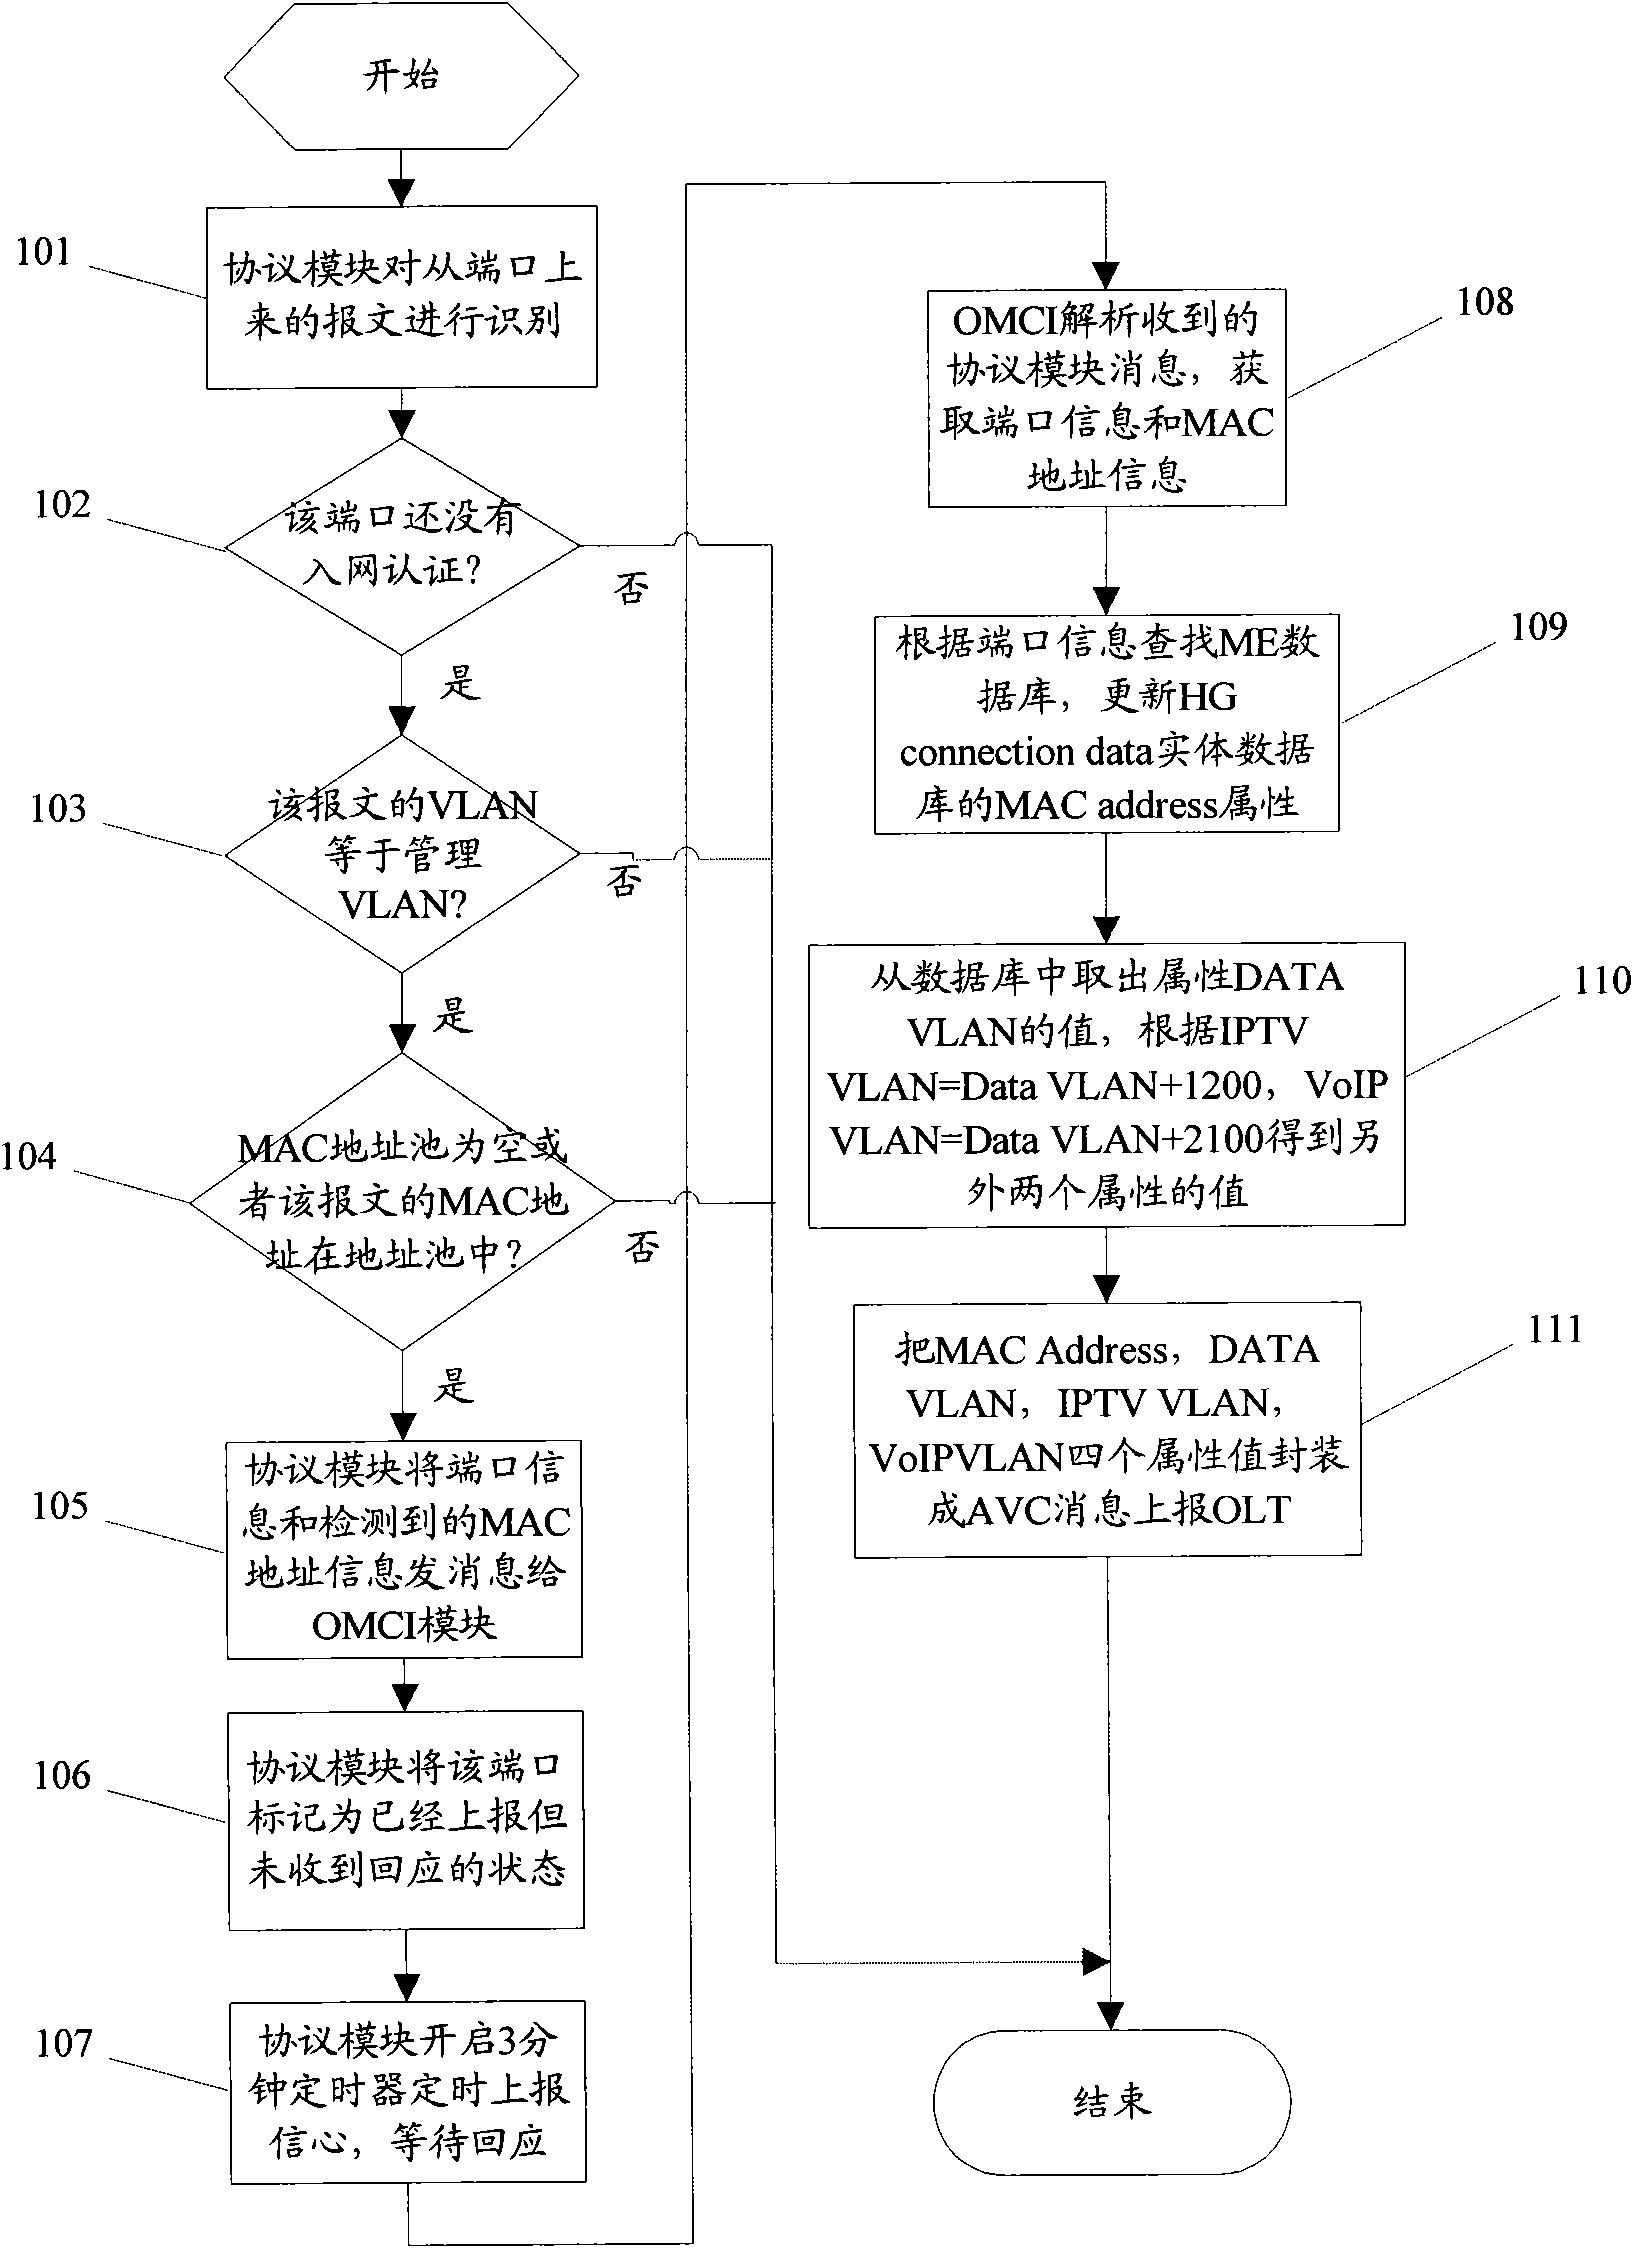 Home gateway identifying and networking method and system